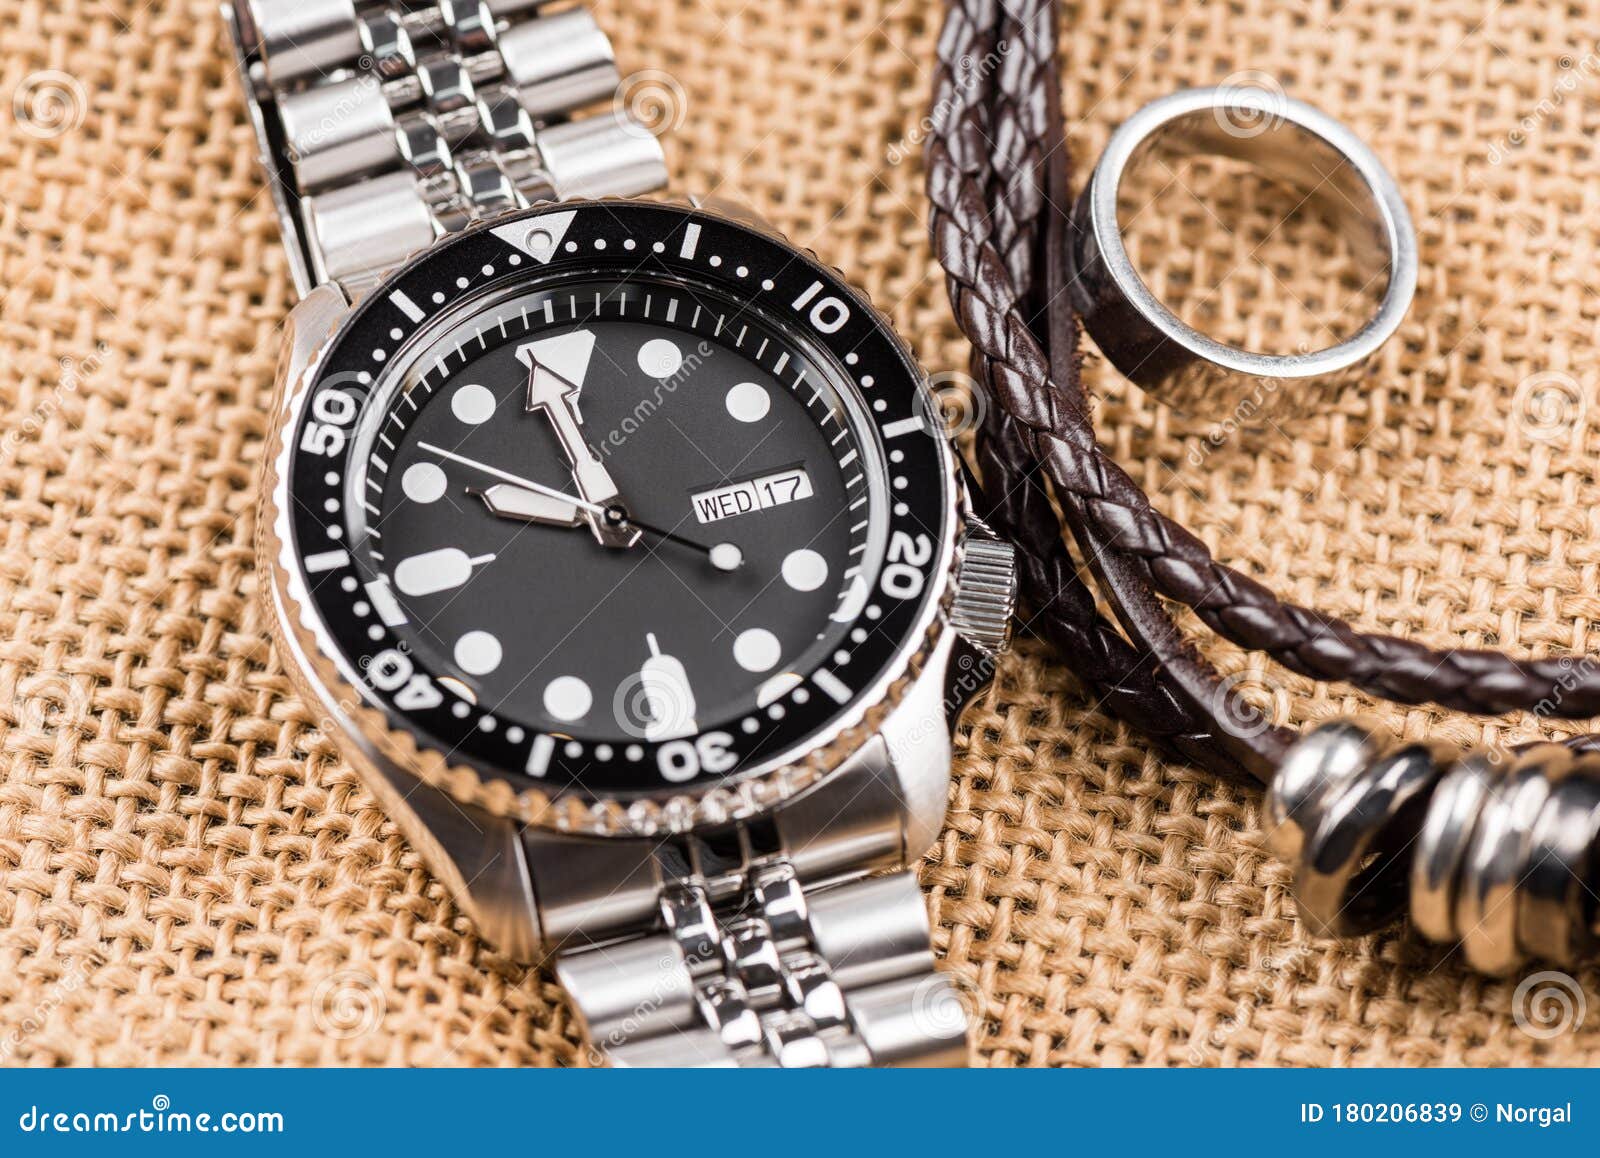 Luxury wristwatch for men stock image. Image of expensive - 180206839